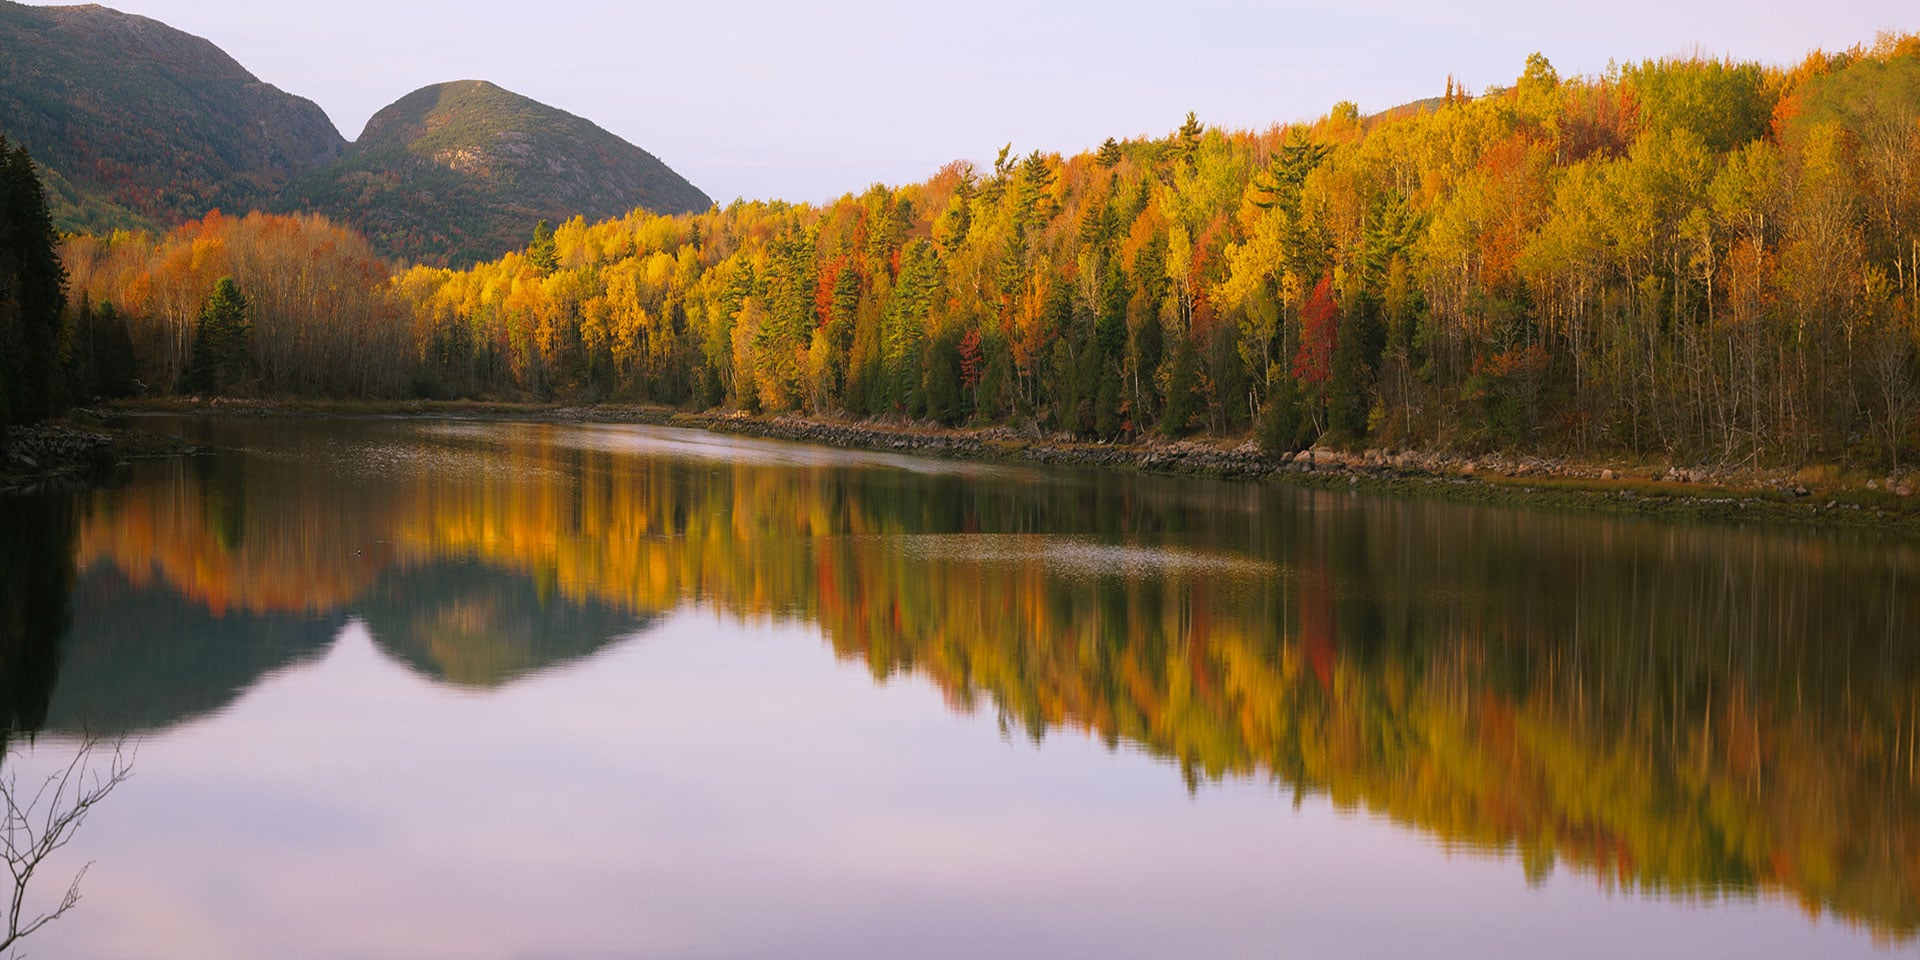 Nowhere Does Autumn Quite Like New England. These Are the Best Things to Do There in Fall